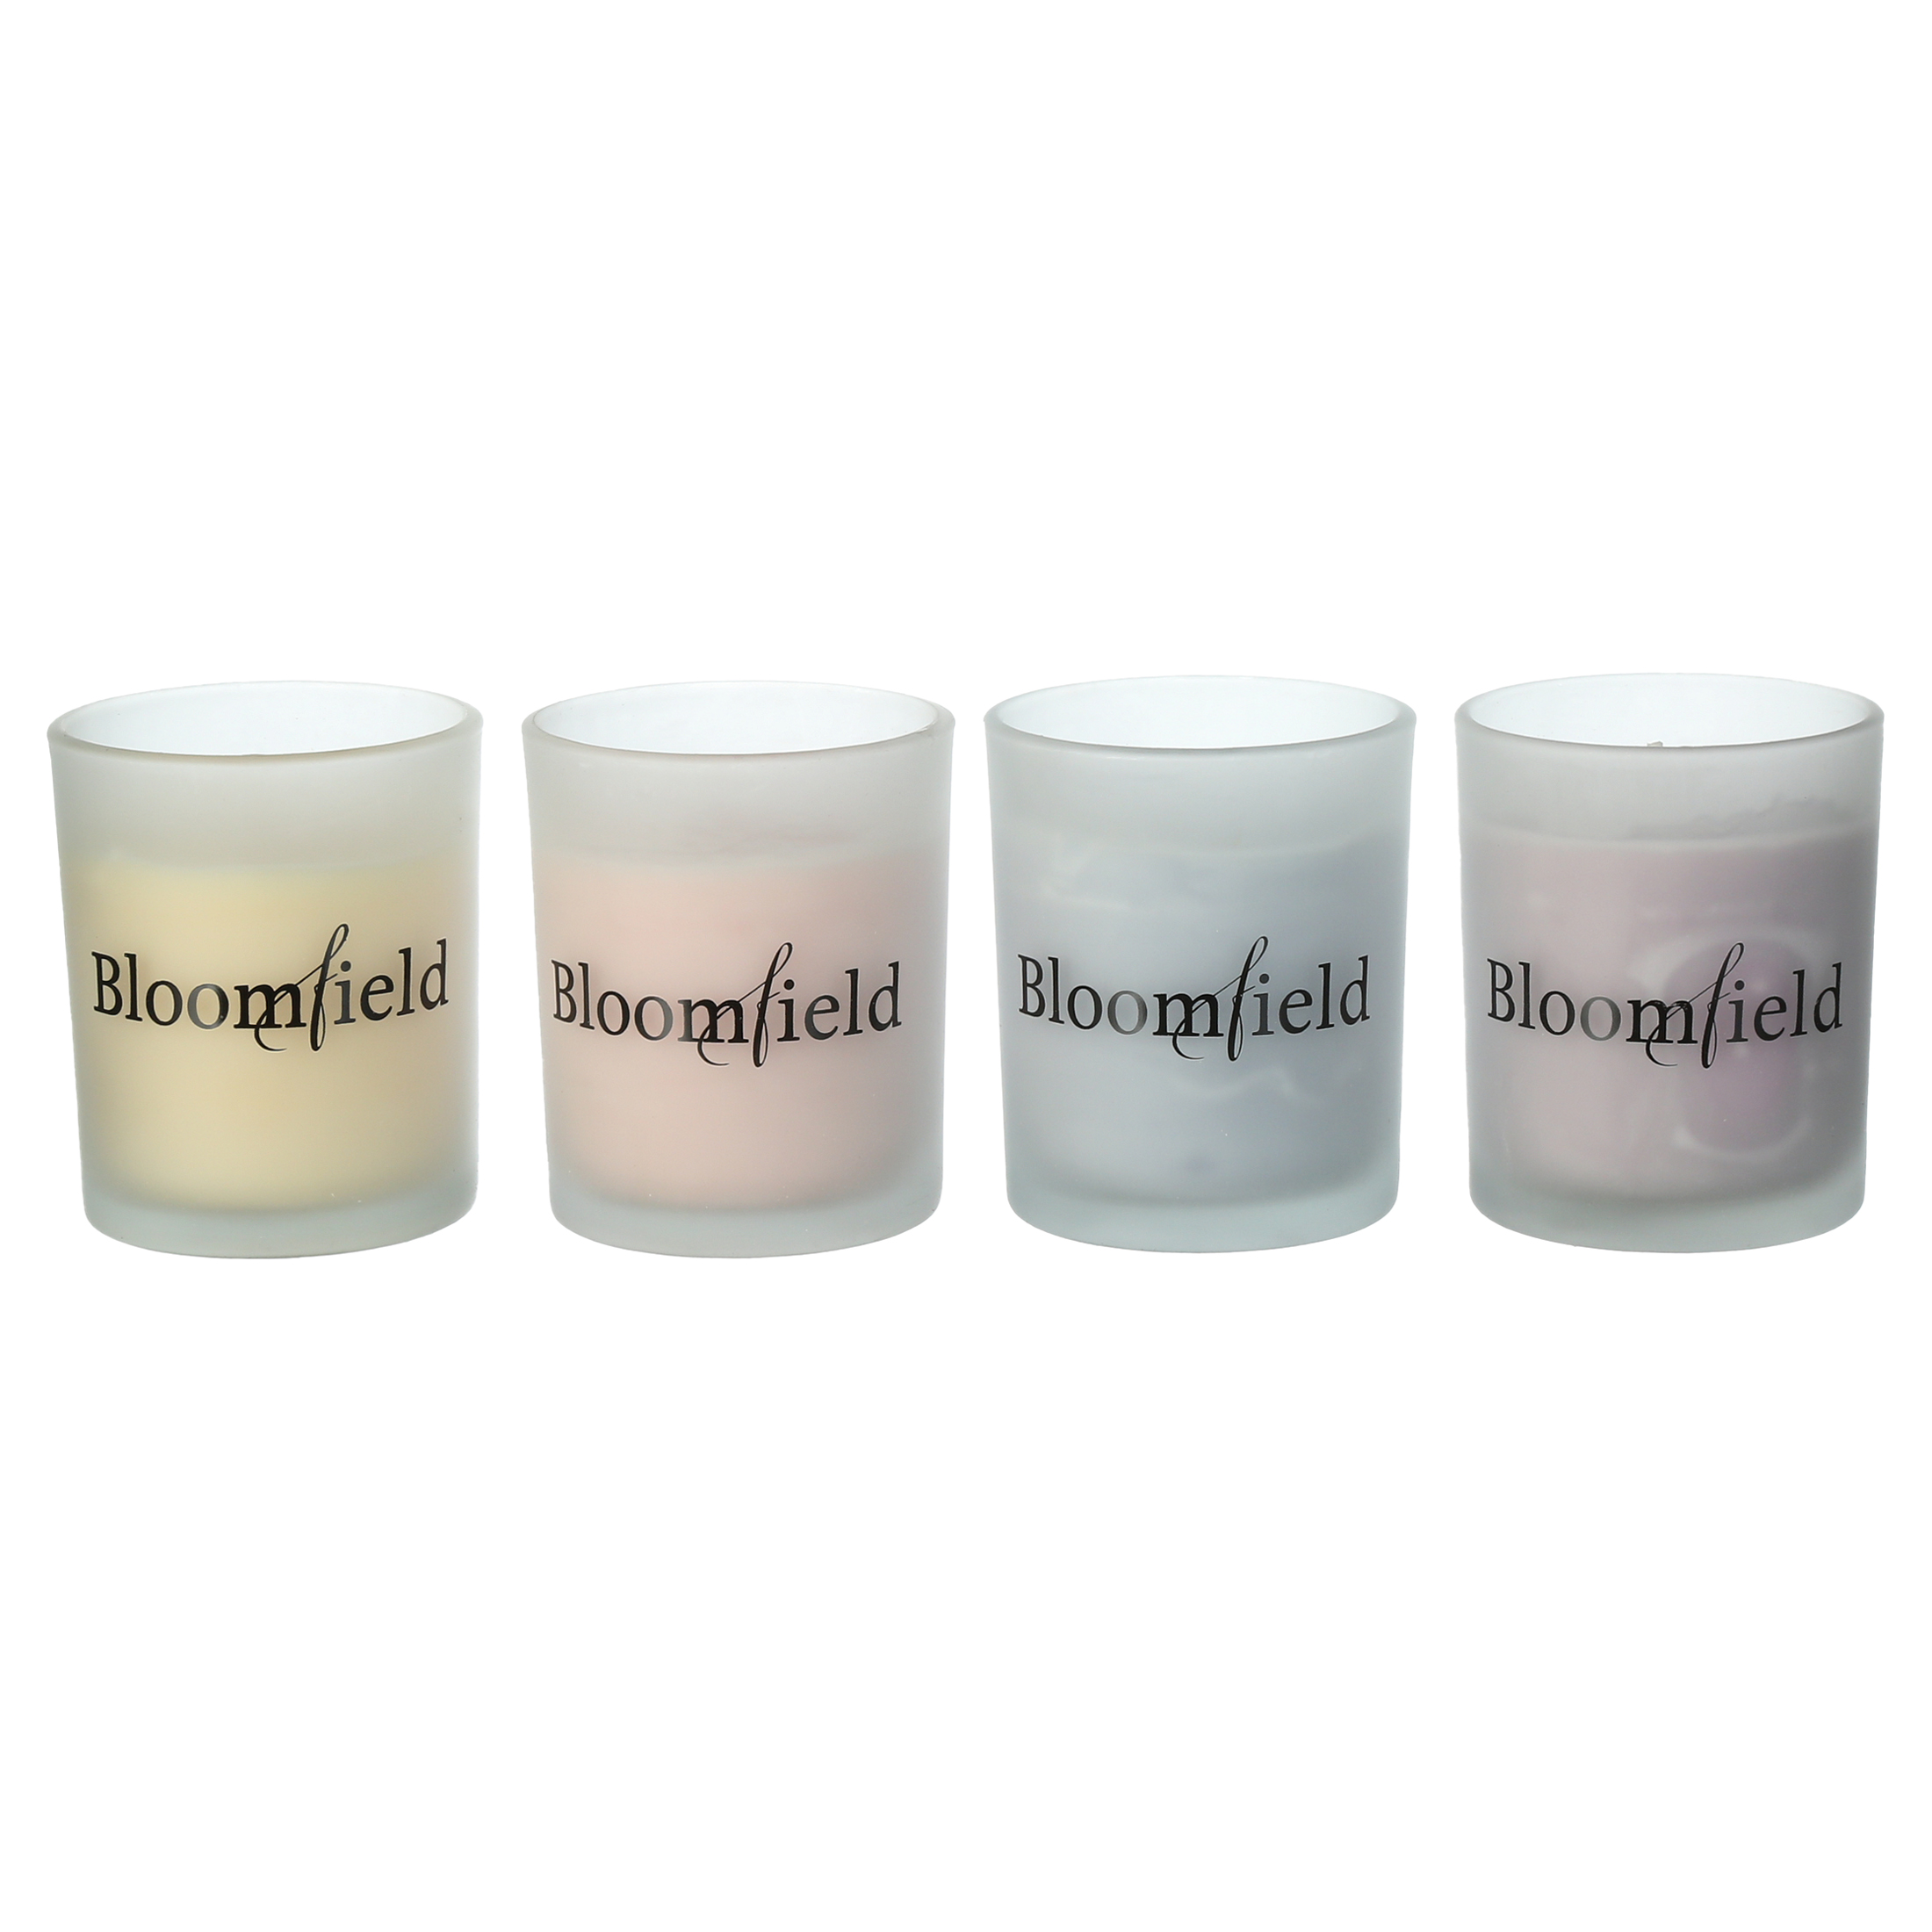 Bloomfield Luxury Soy Aromatherapy Candle Set, 4pc - image 5 of 8